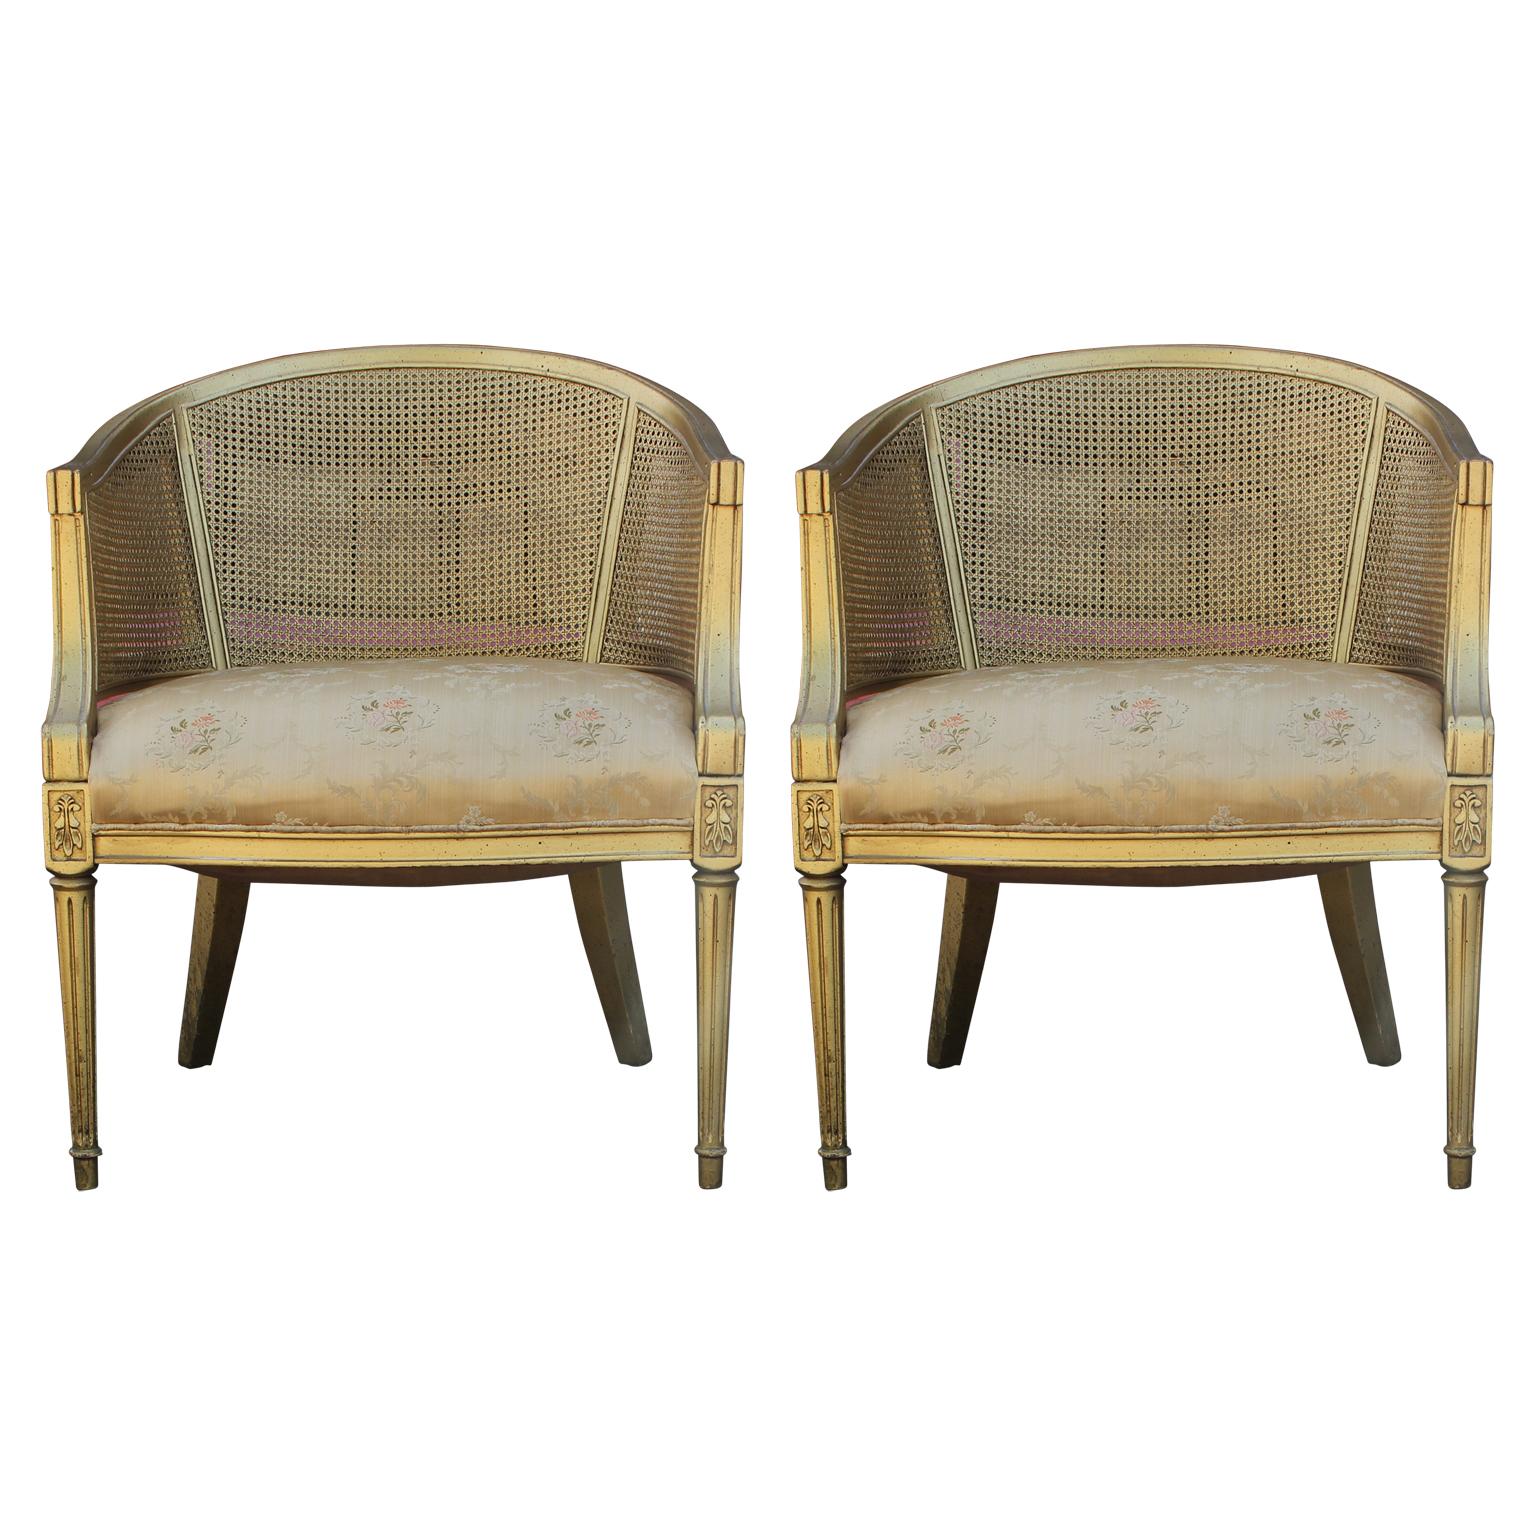 Pair of Hollywood Regency Gold Cane Barrel Back Lounge Chairs